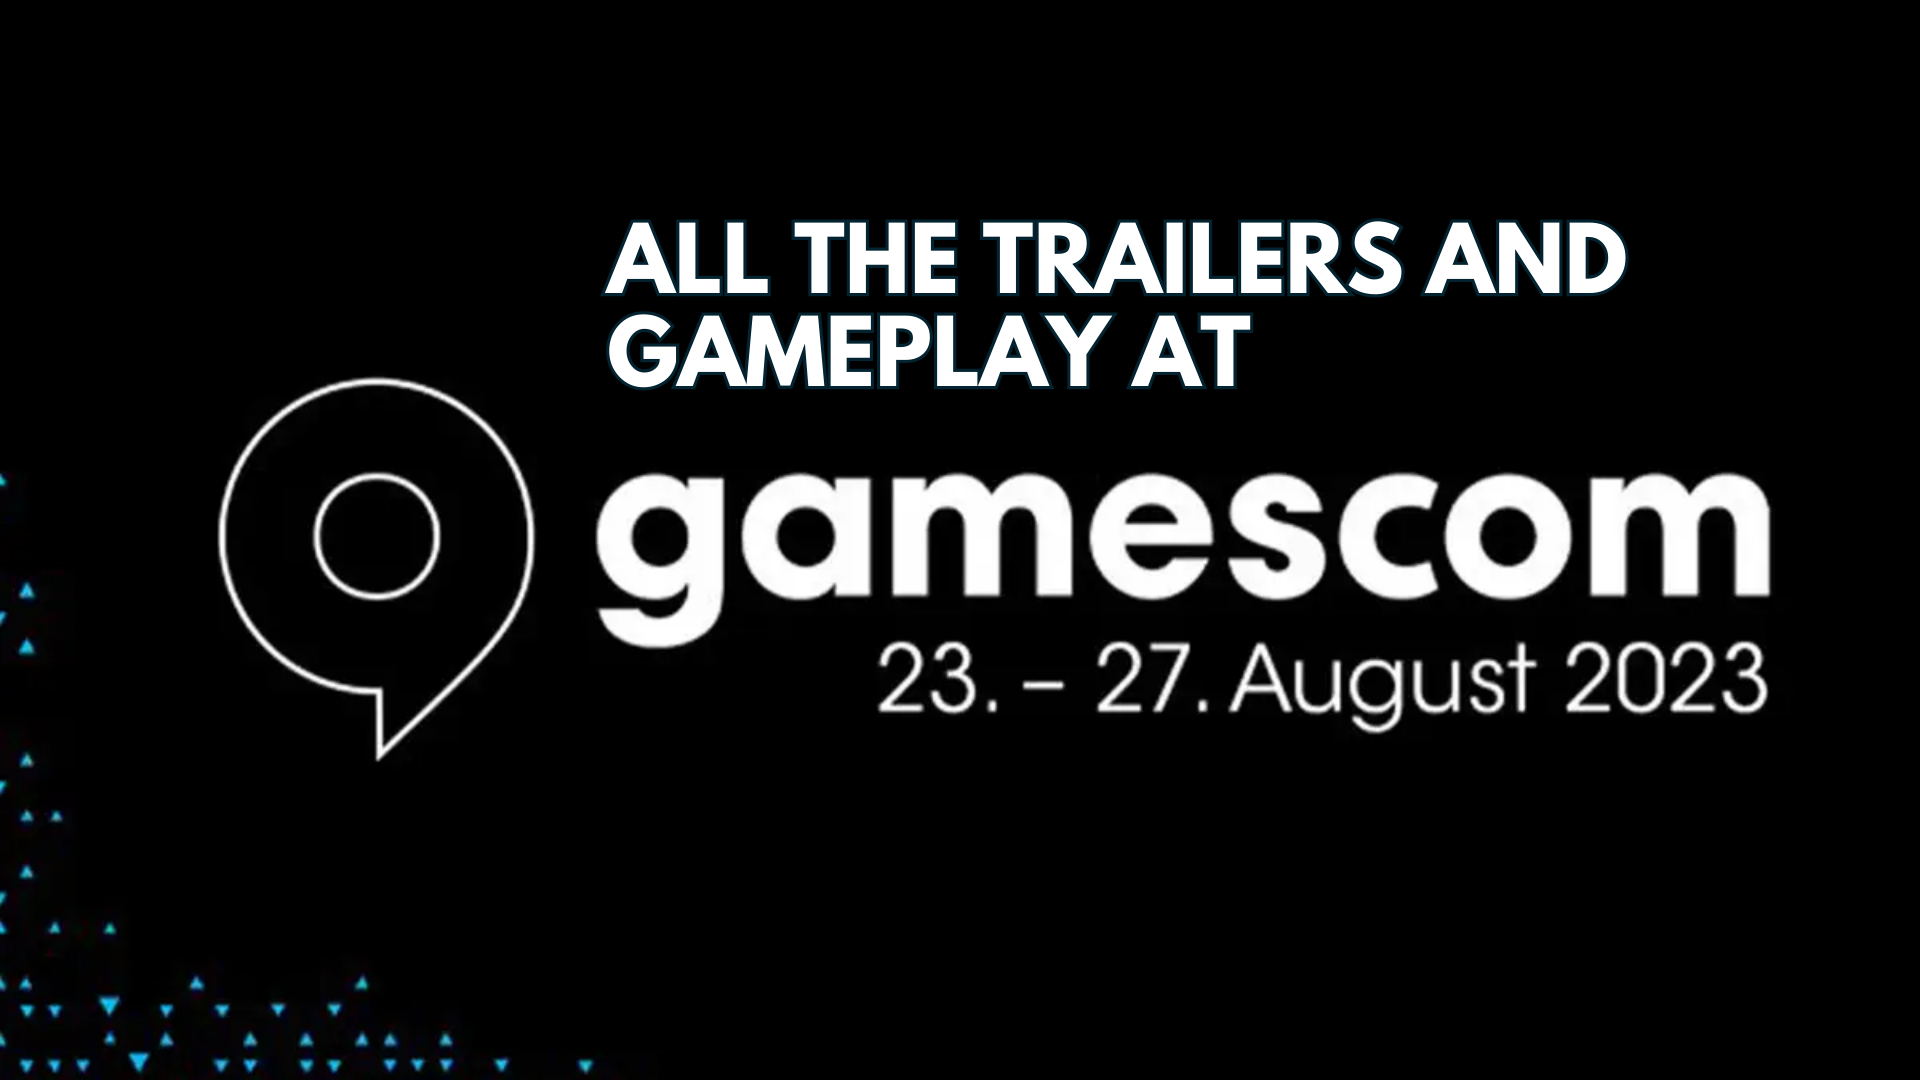 All trailers and gameplays shown at Gamescom 2023 – Opening Night Live